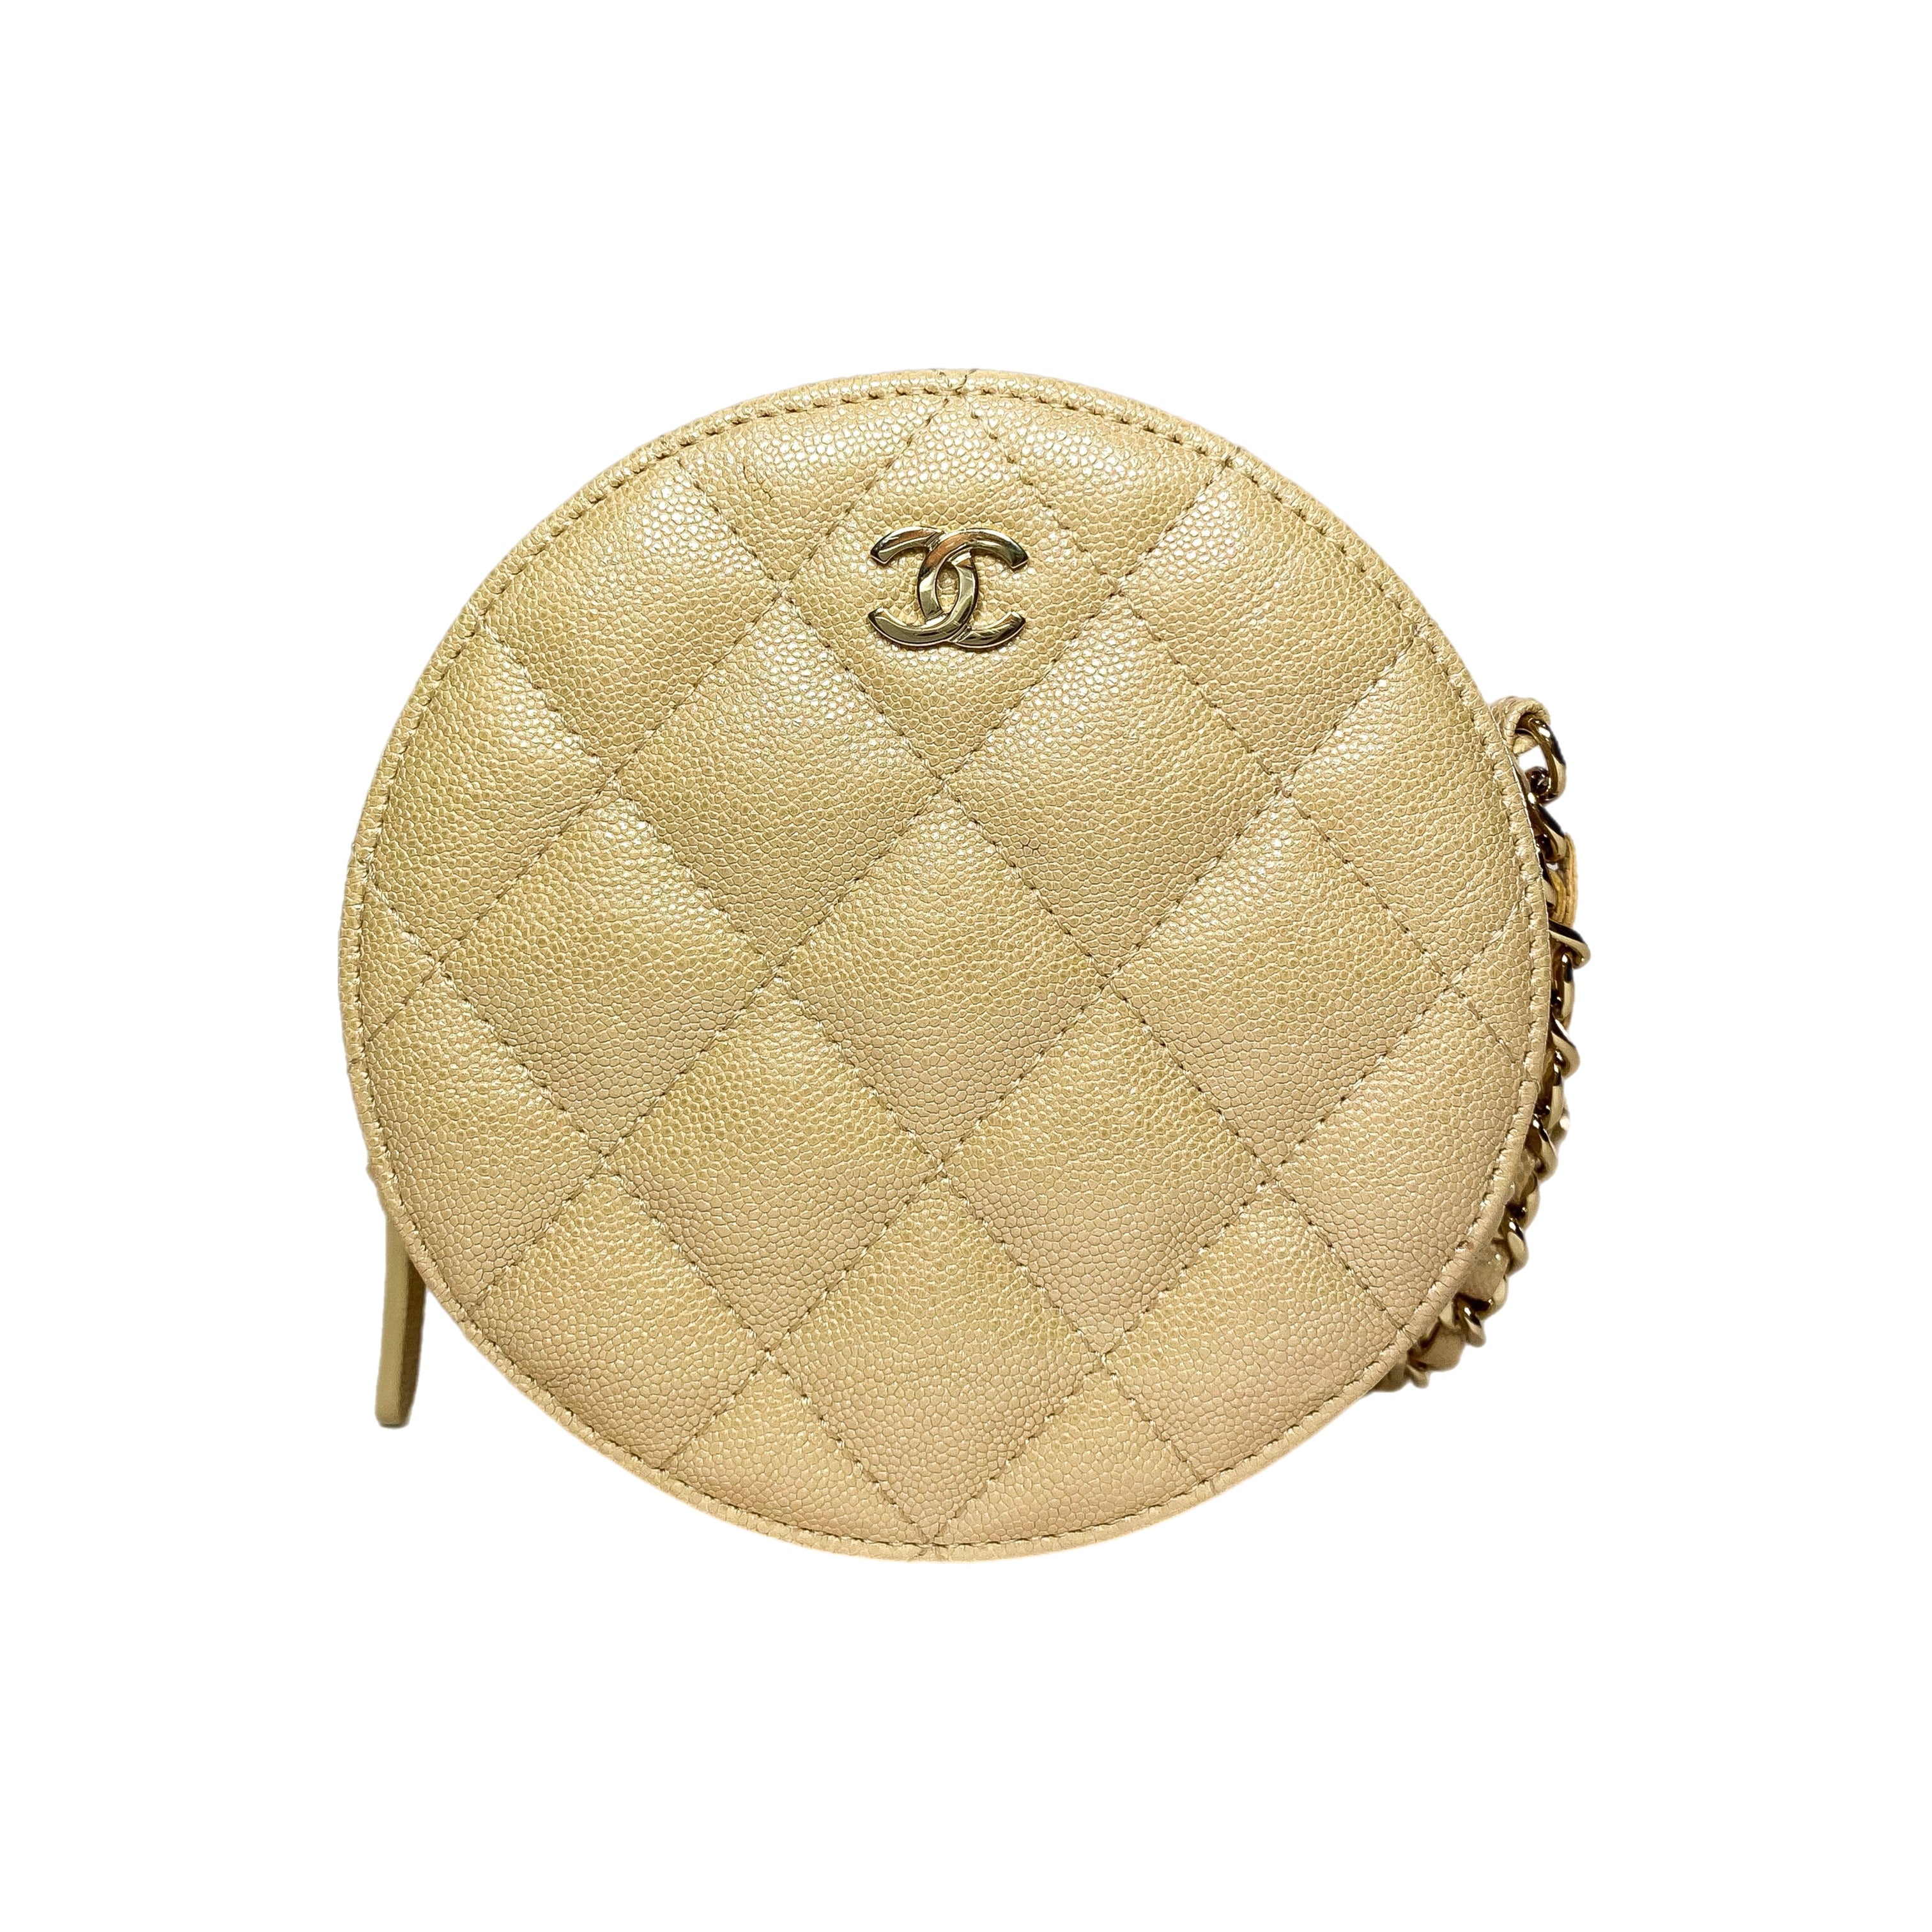 Chanel Beige Iridescent Quilted Caviar Round Clutch with Chain